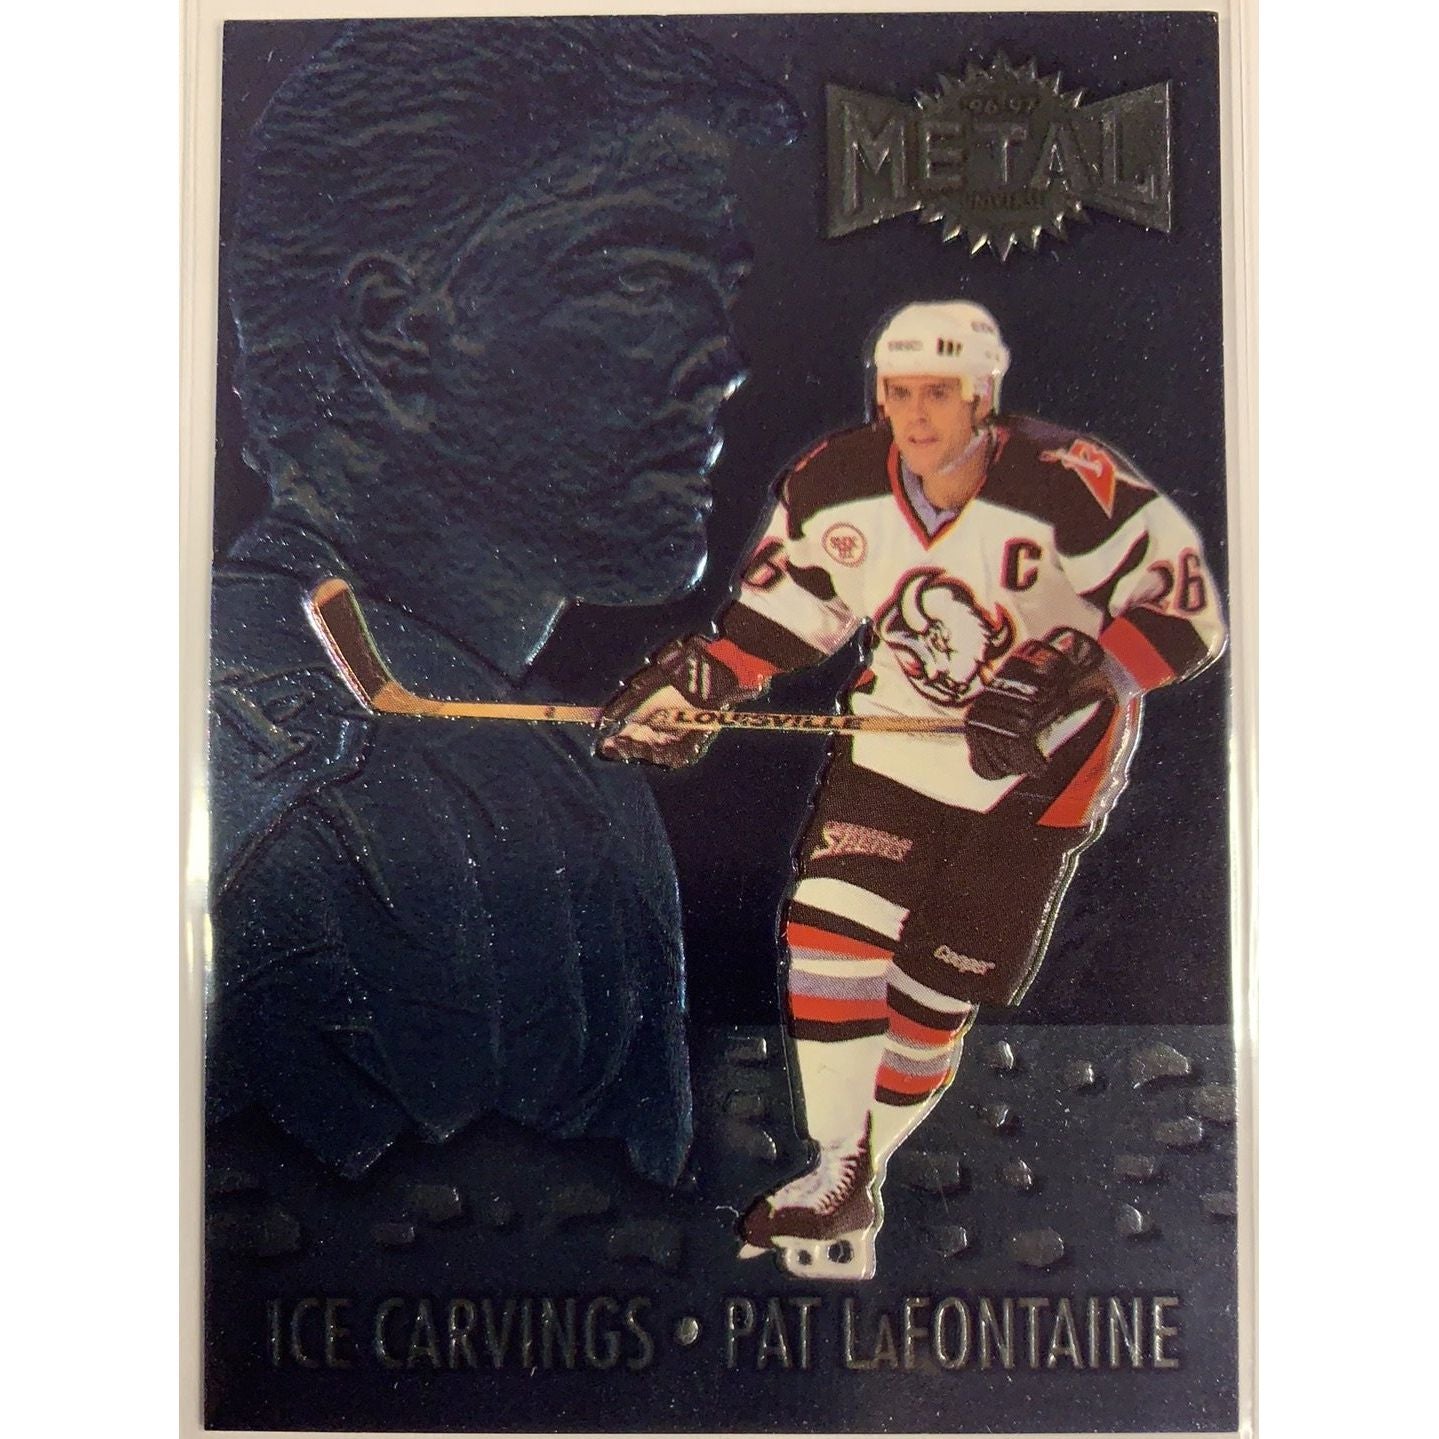  1996-97 Fleer Skybox Metal Universe Pat Lafontaine Ice Carvings  Local Legends Cards & Collectibles